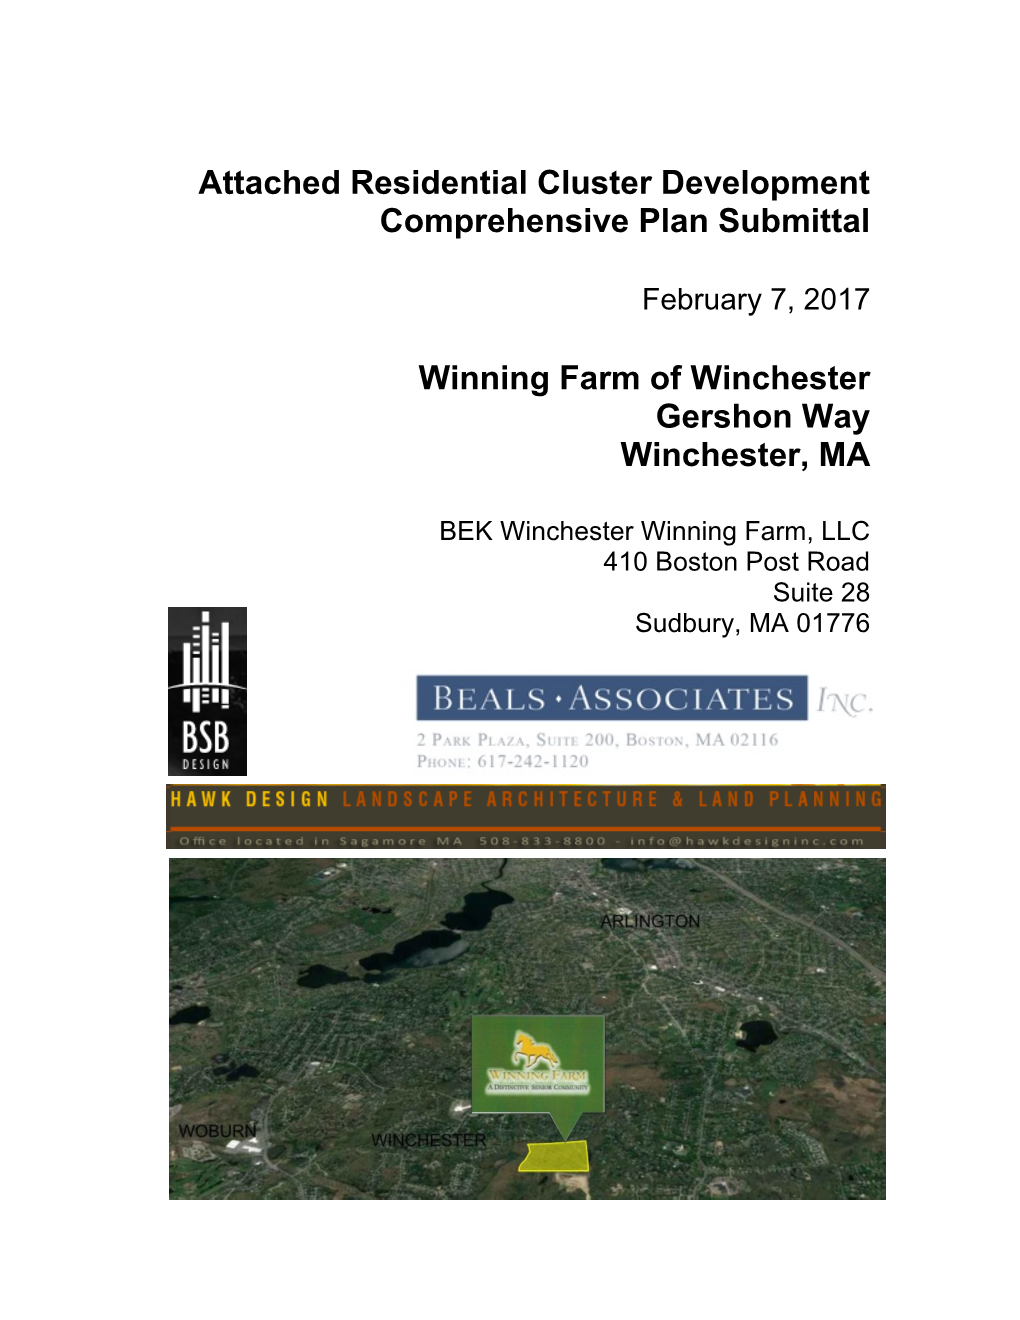 Attached Residential Cluster Development Comprehensive Plan Submittal